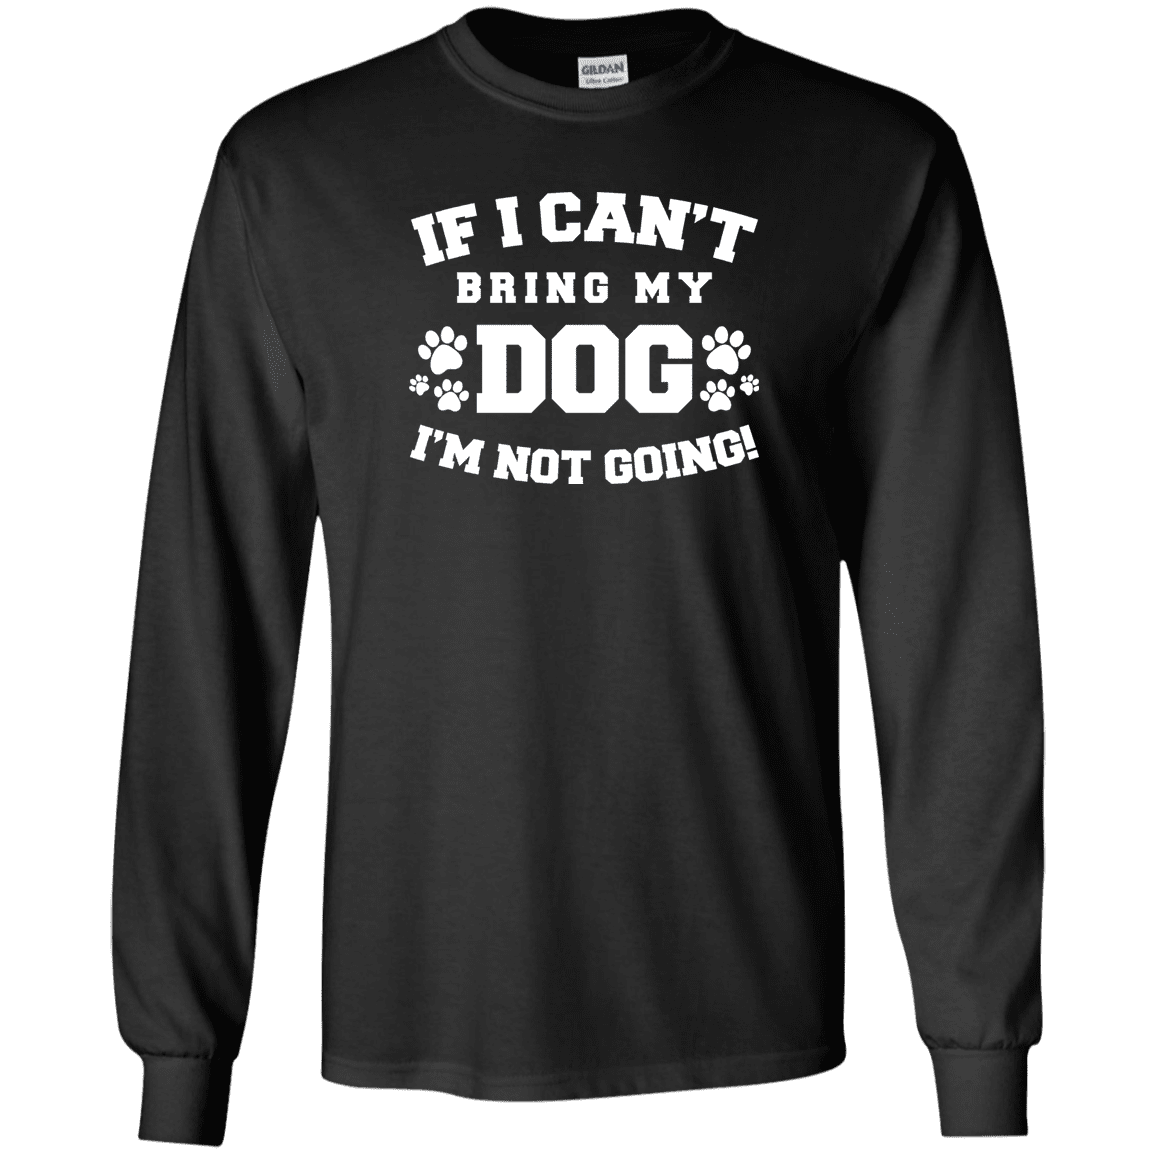 If I Can't Bring My Dog - Long Sleeve T Shirt.